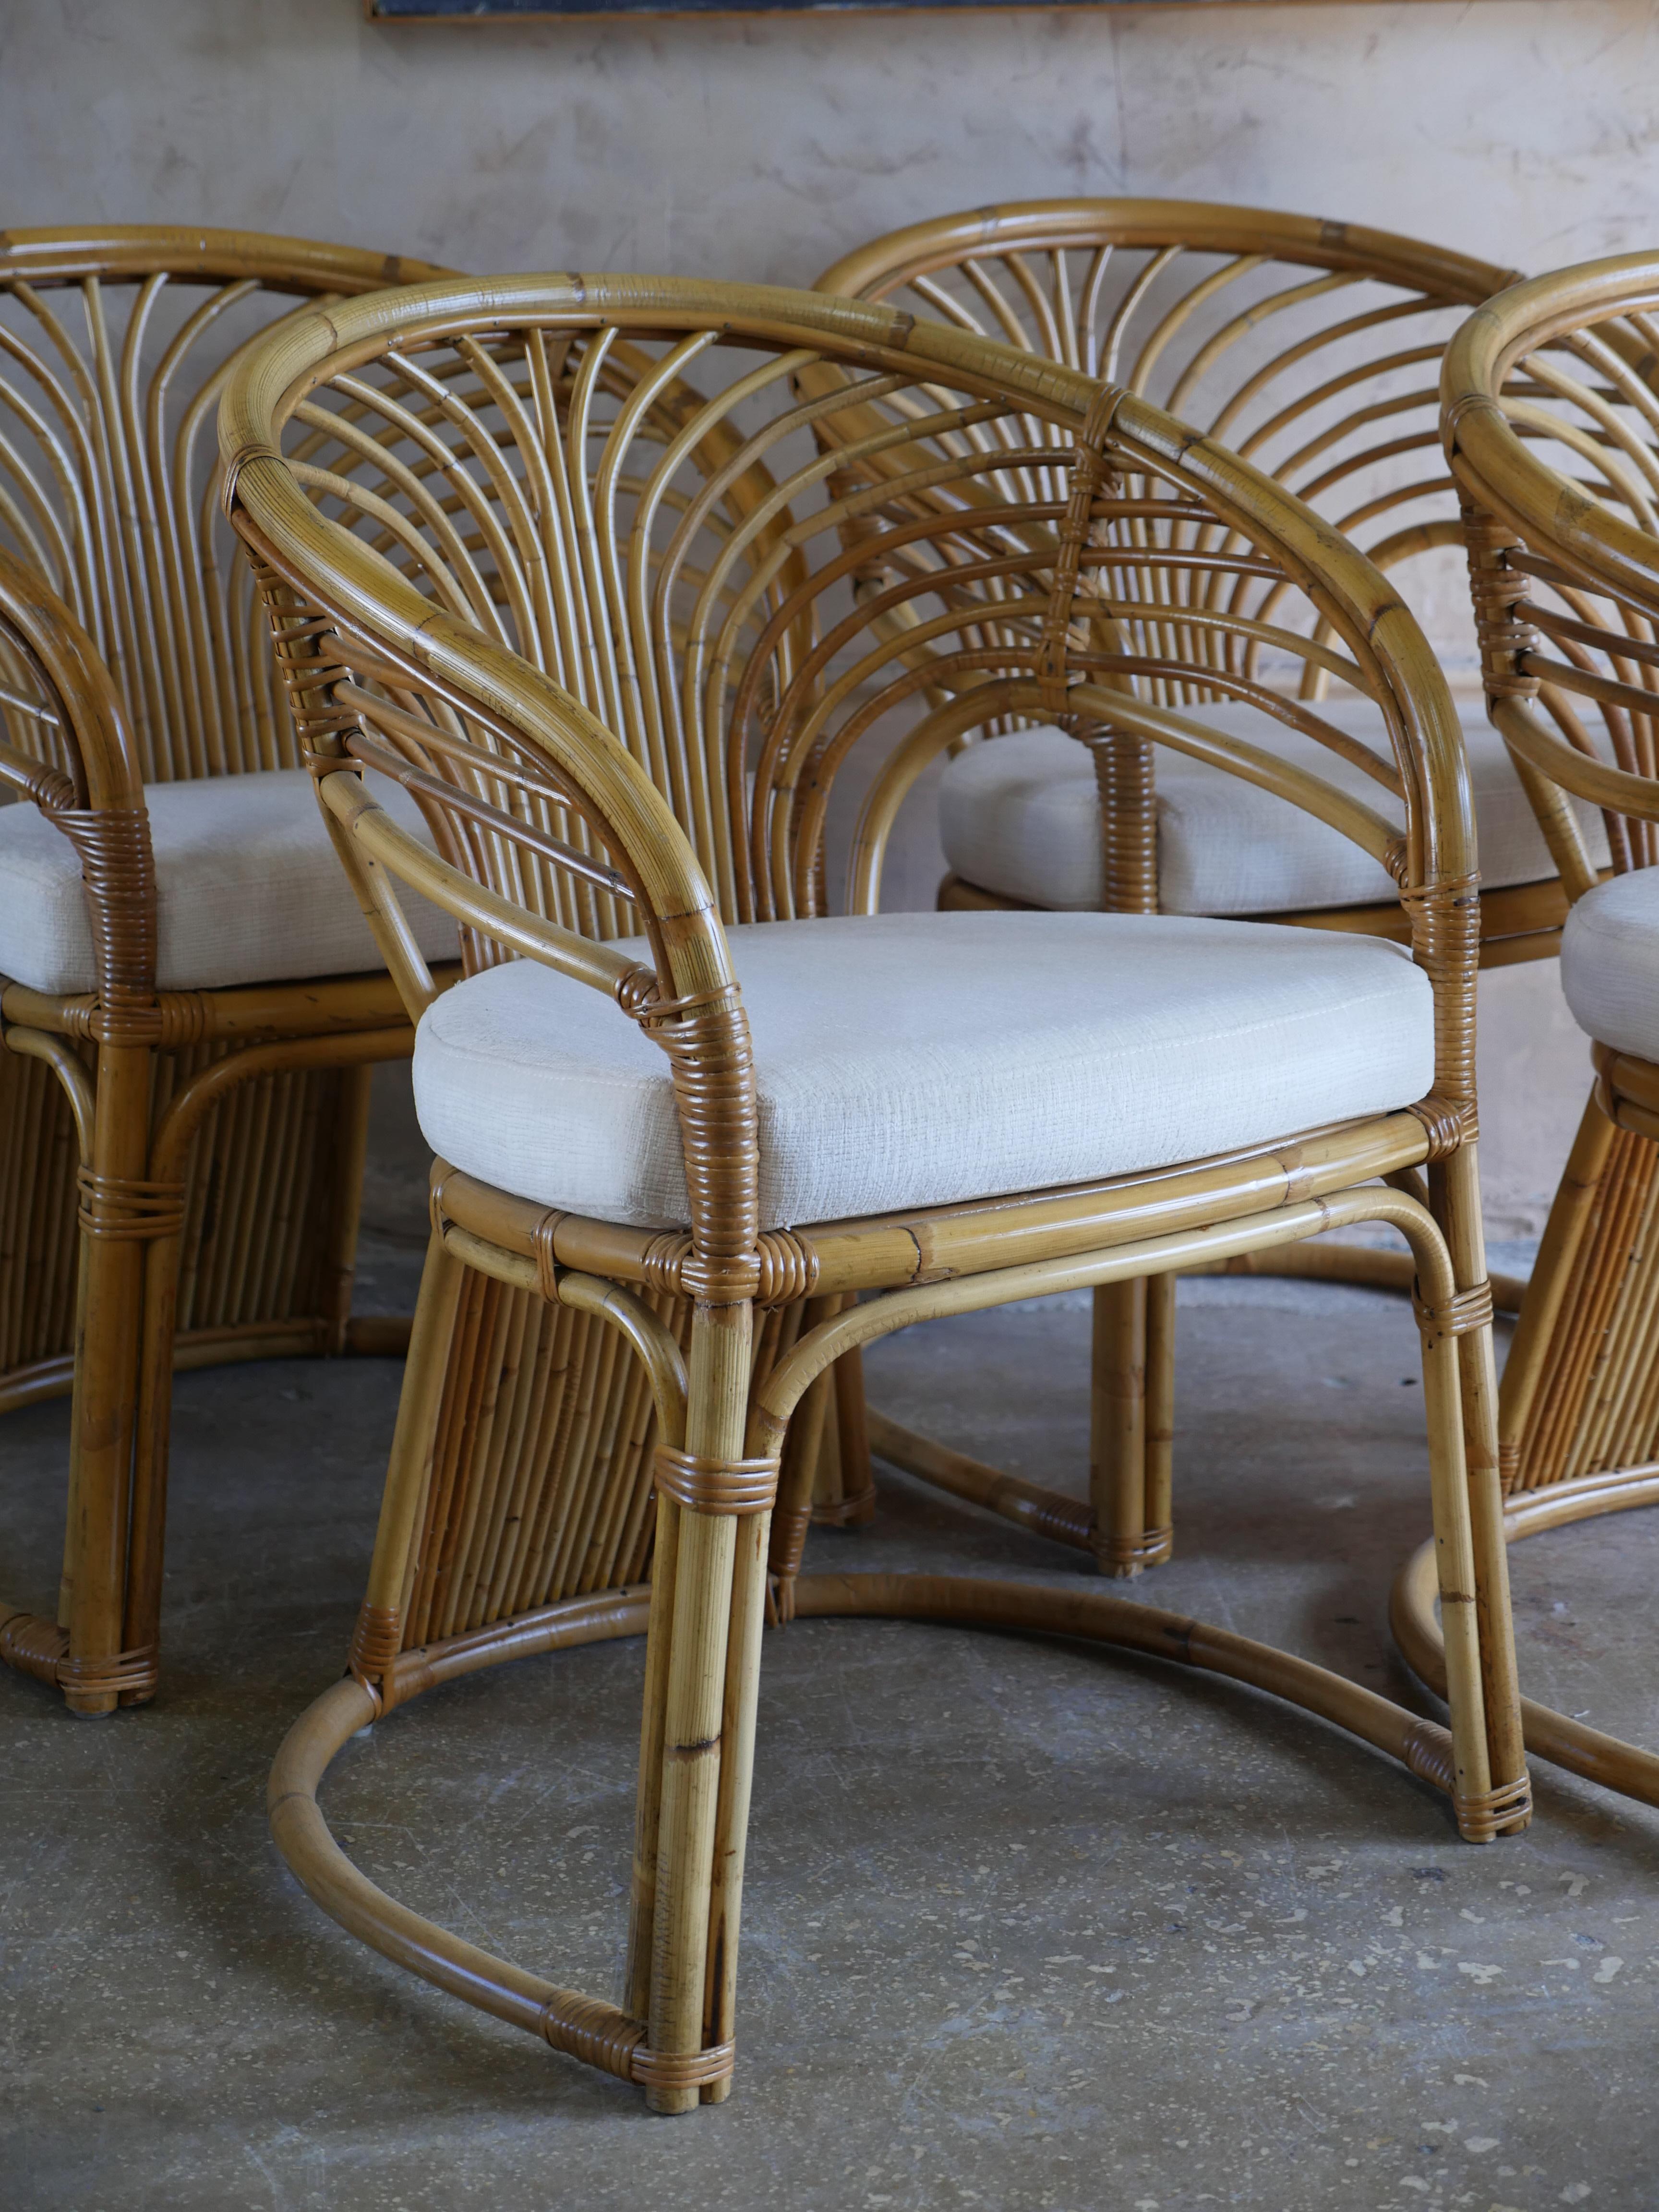 1980s Coastal Rattan Dining Chairs with Holly Hunt Chenille Fabric - Set of 4 For Sale 2